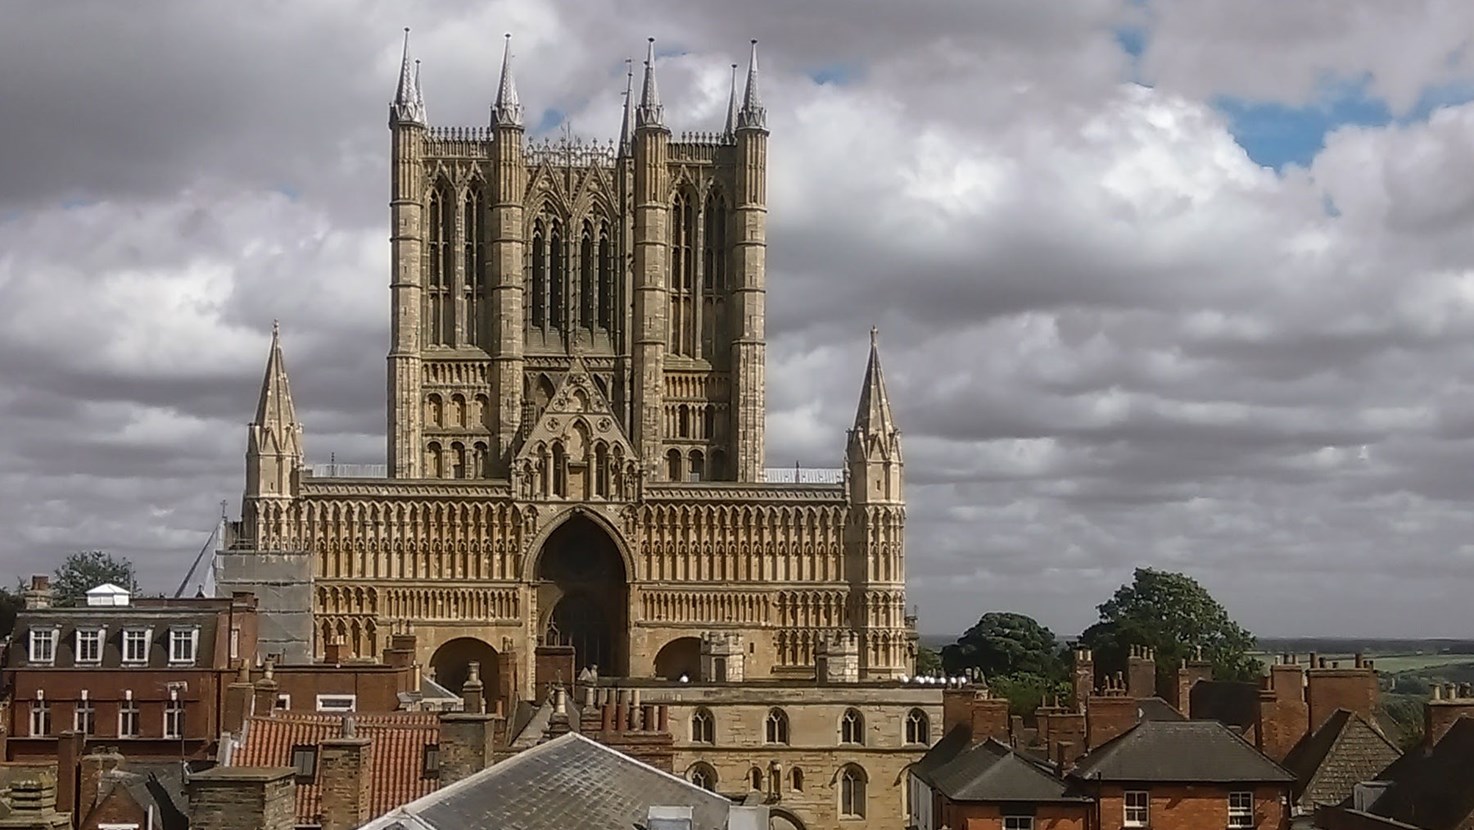 View all of the events and meetings that PCC Marc Jones has attended or hosted at Lincoln Cathedral in 2021